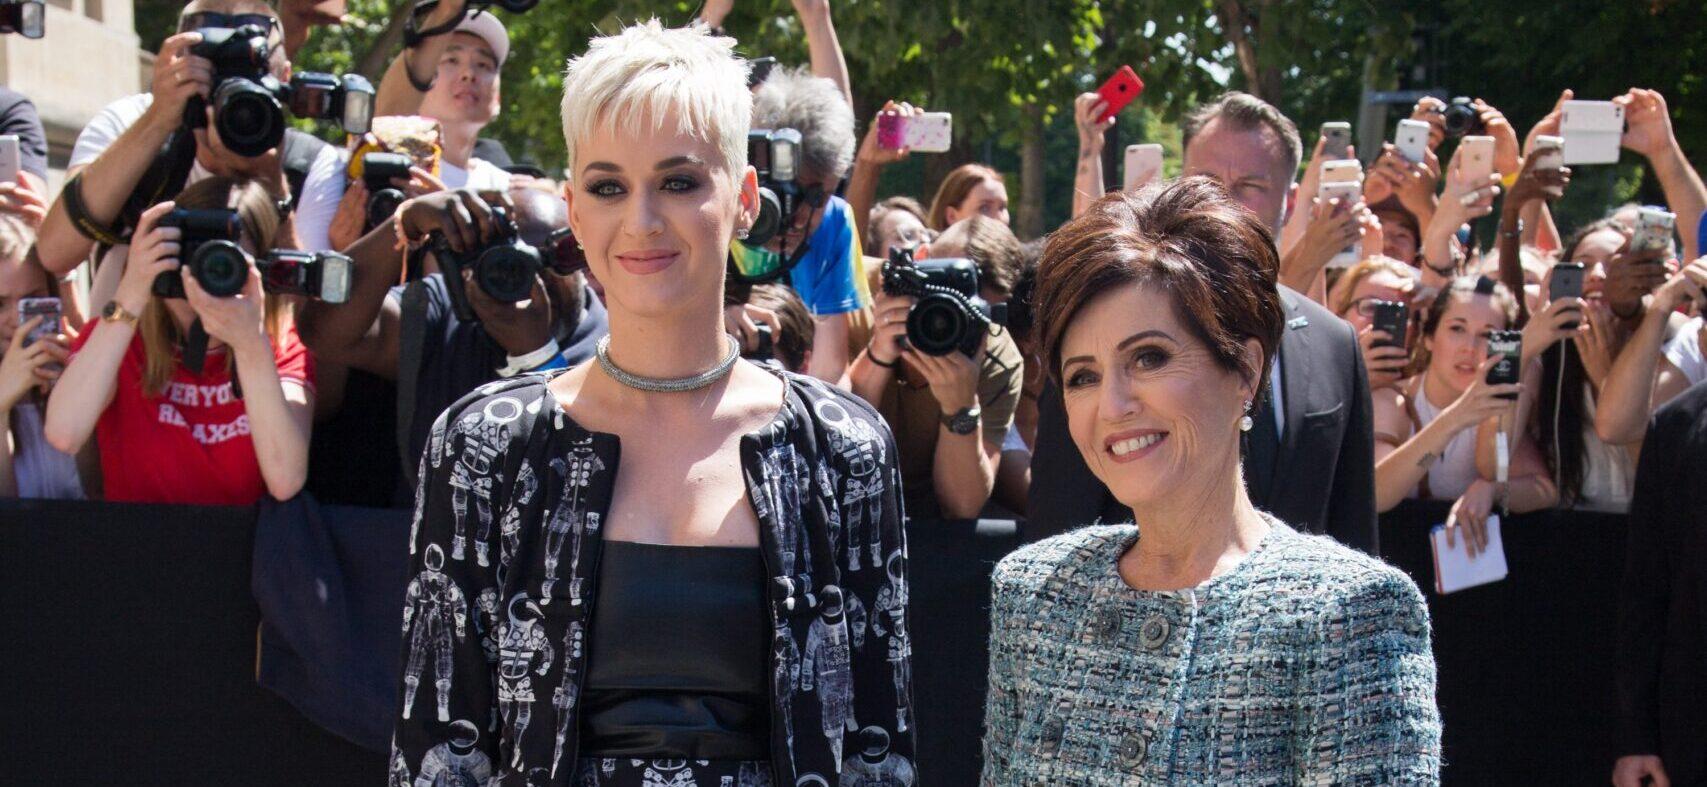 Katy Perry’s Mom Volunteers To Feed Homeless Veterans, After Daughter’s Legal Battle With Disabled Army Vet